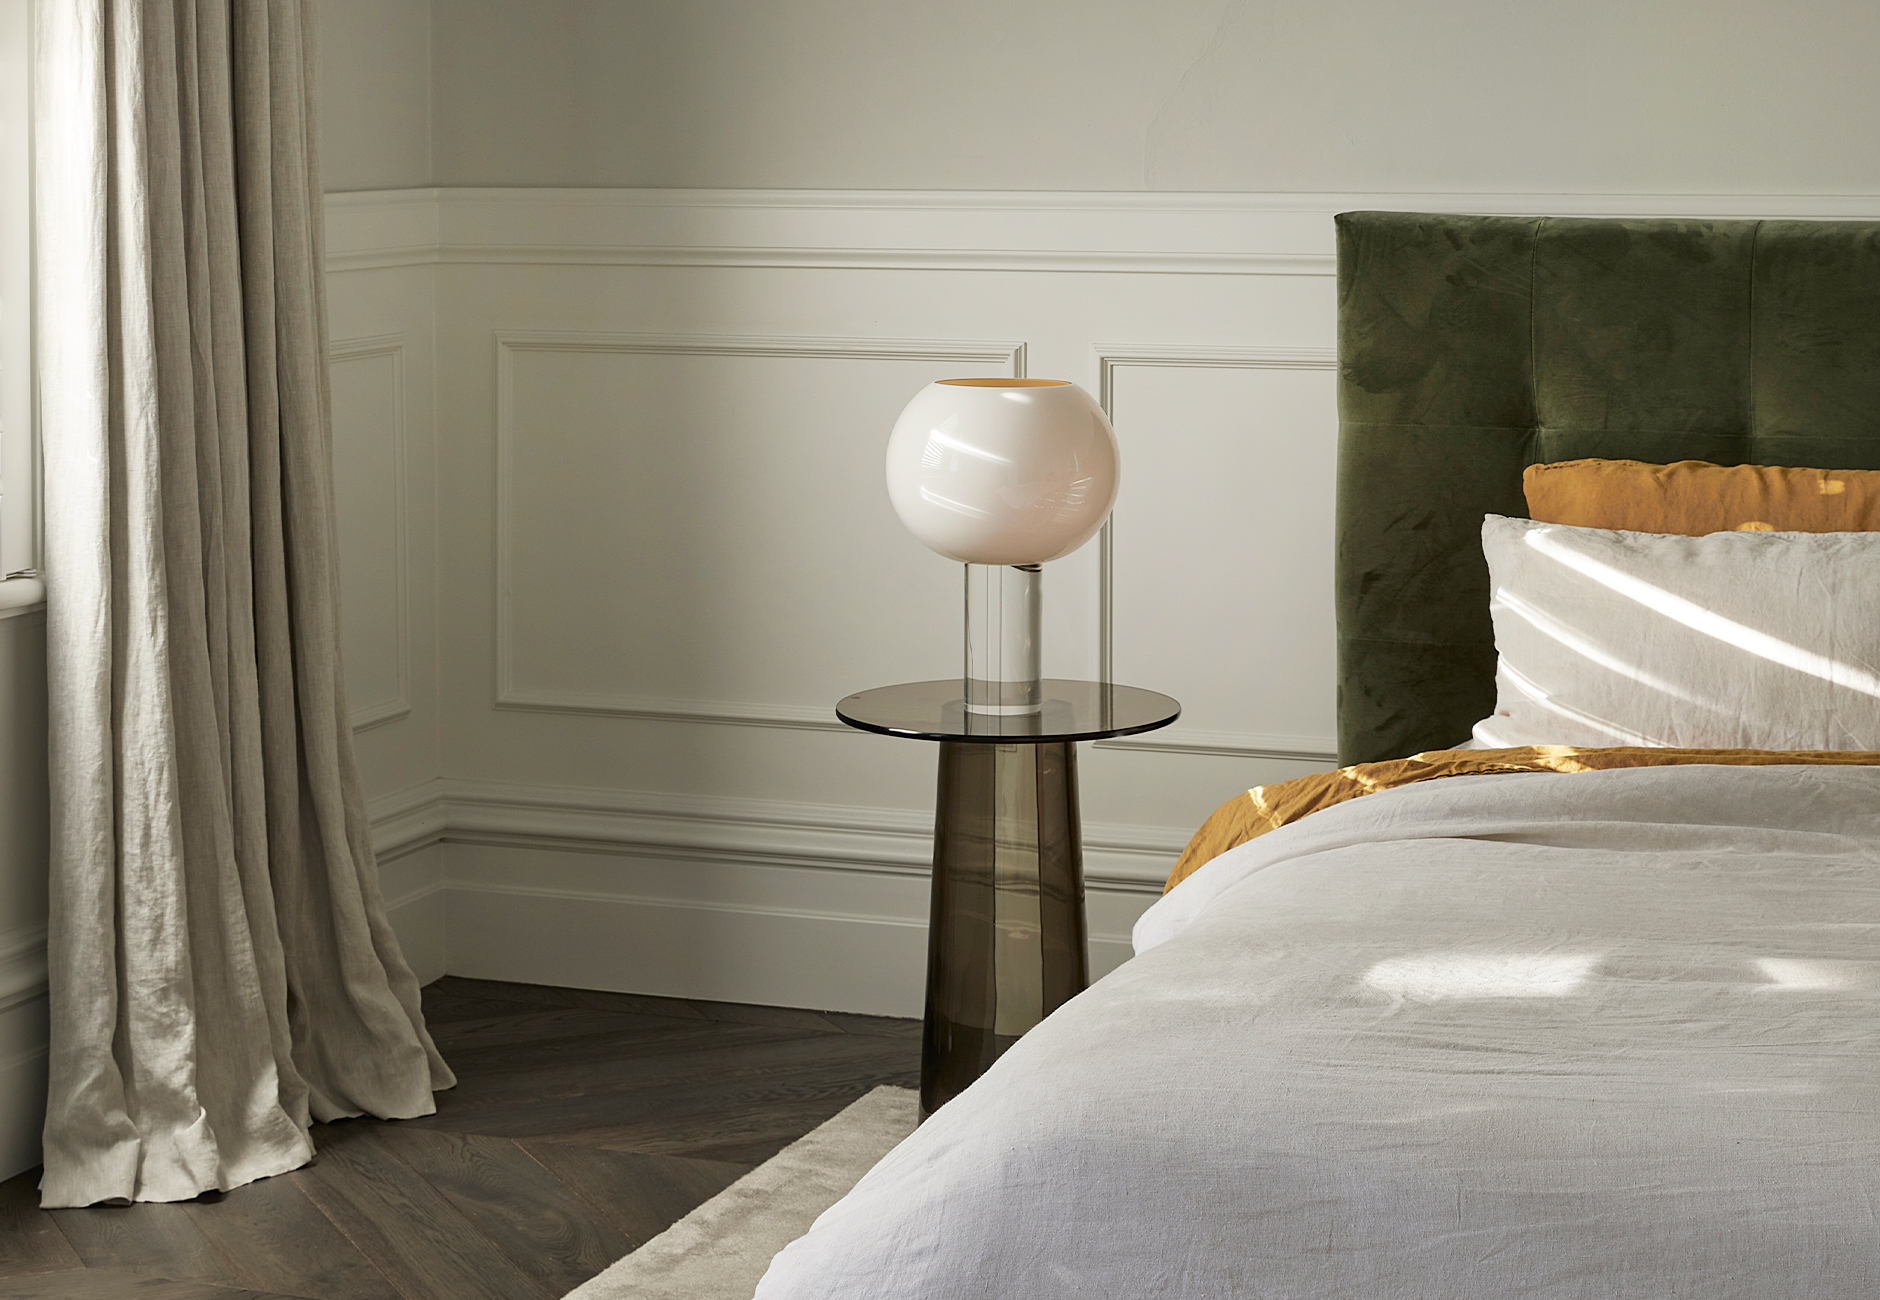 The bedroom features the Buds 2 table lamp by Foscarini. Photo © Derek Swalwell.